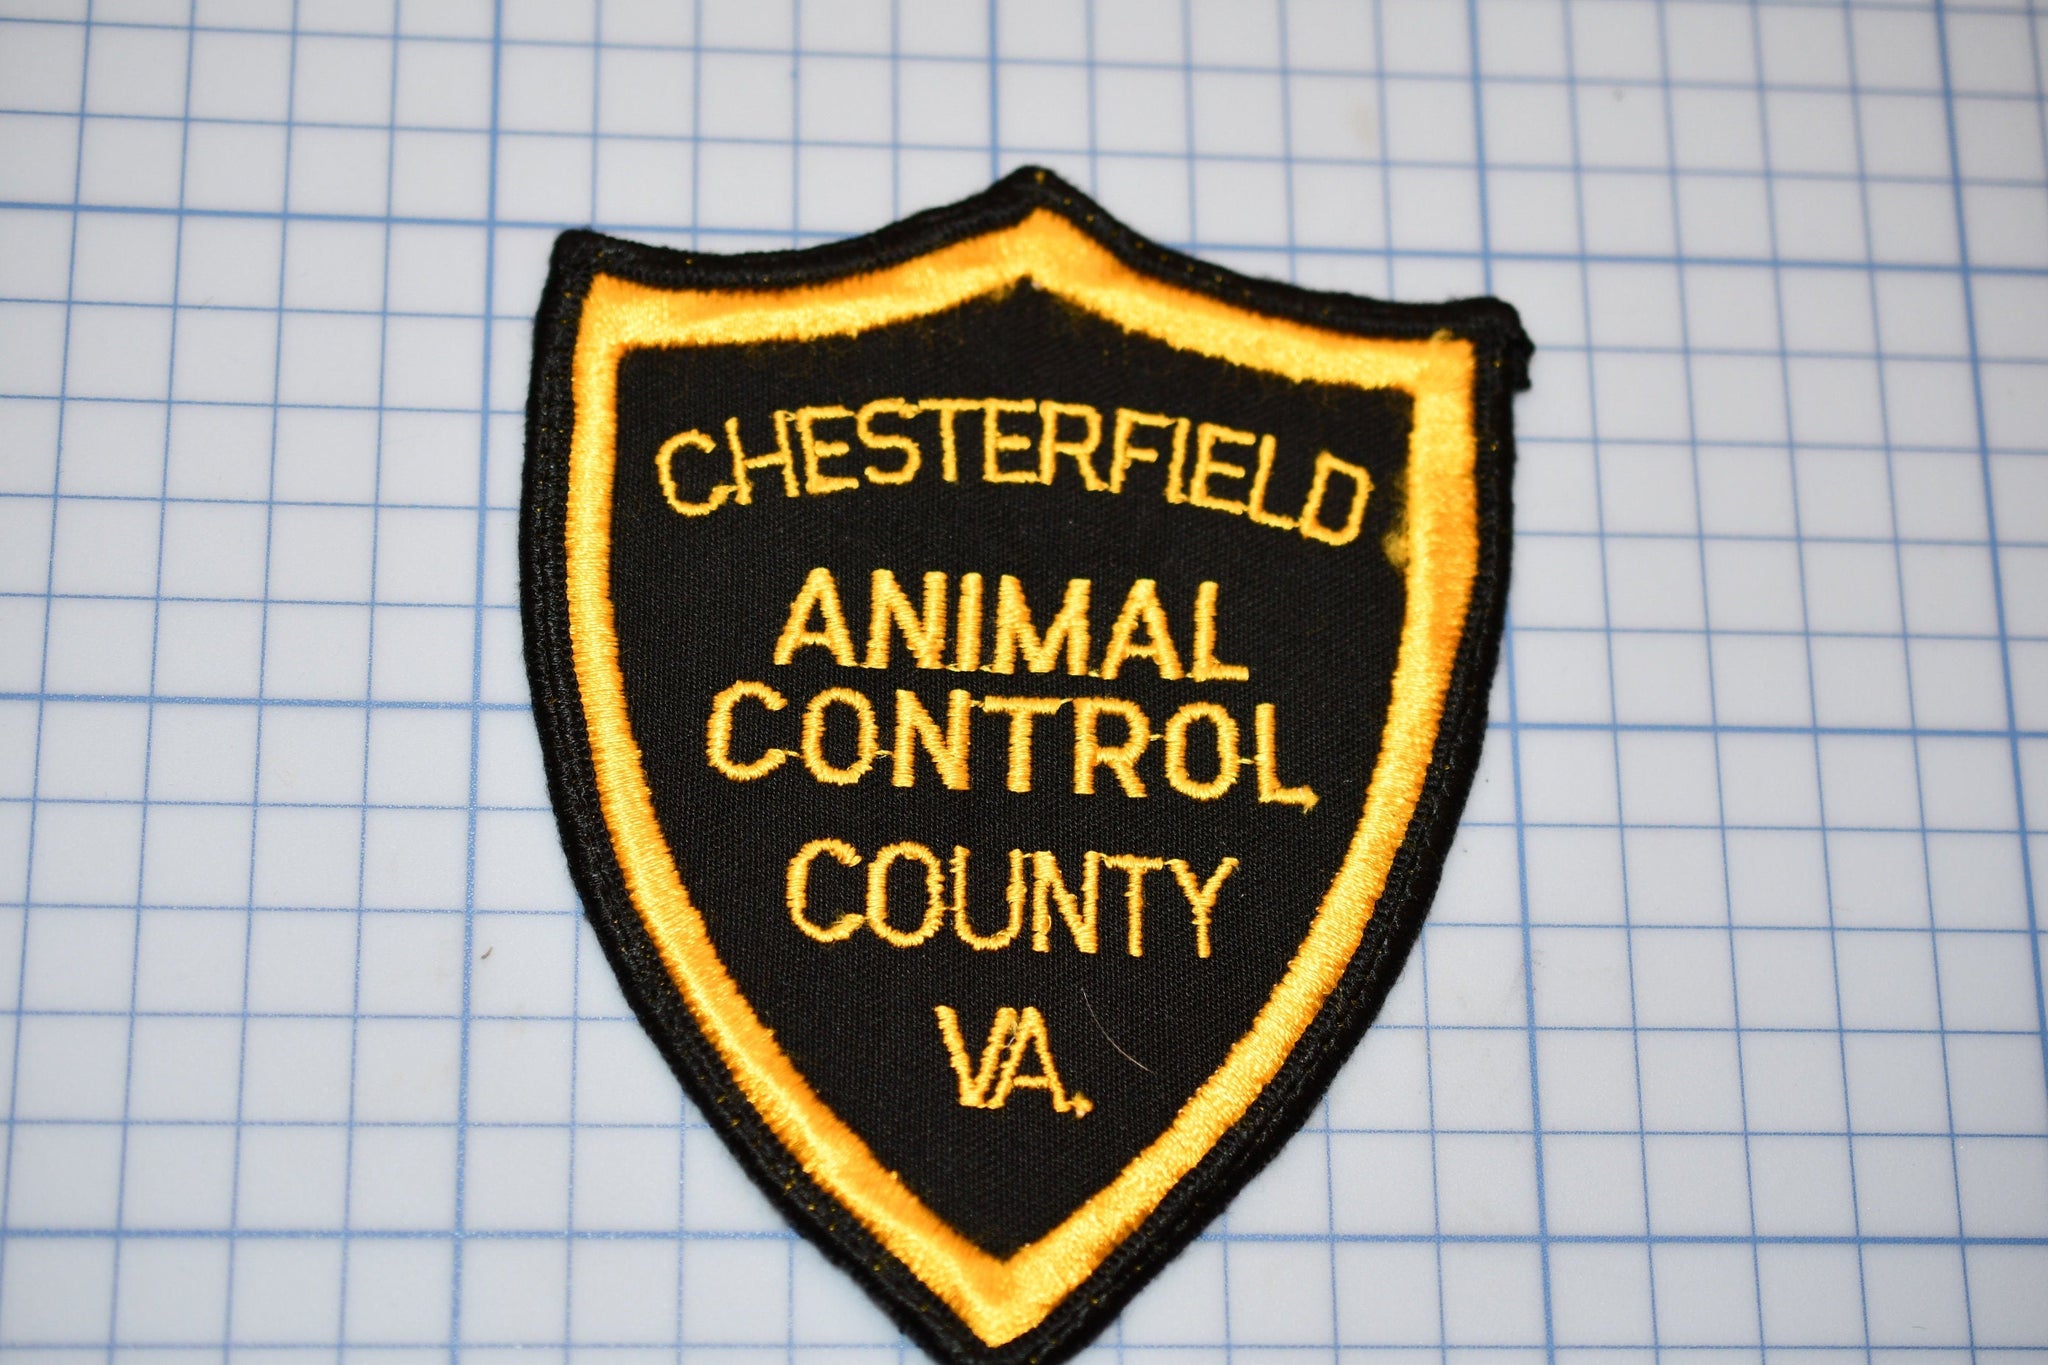 Chesterfield County Virginia Animal Control Patch (B11-256)